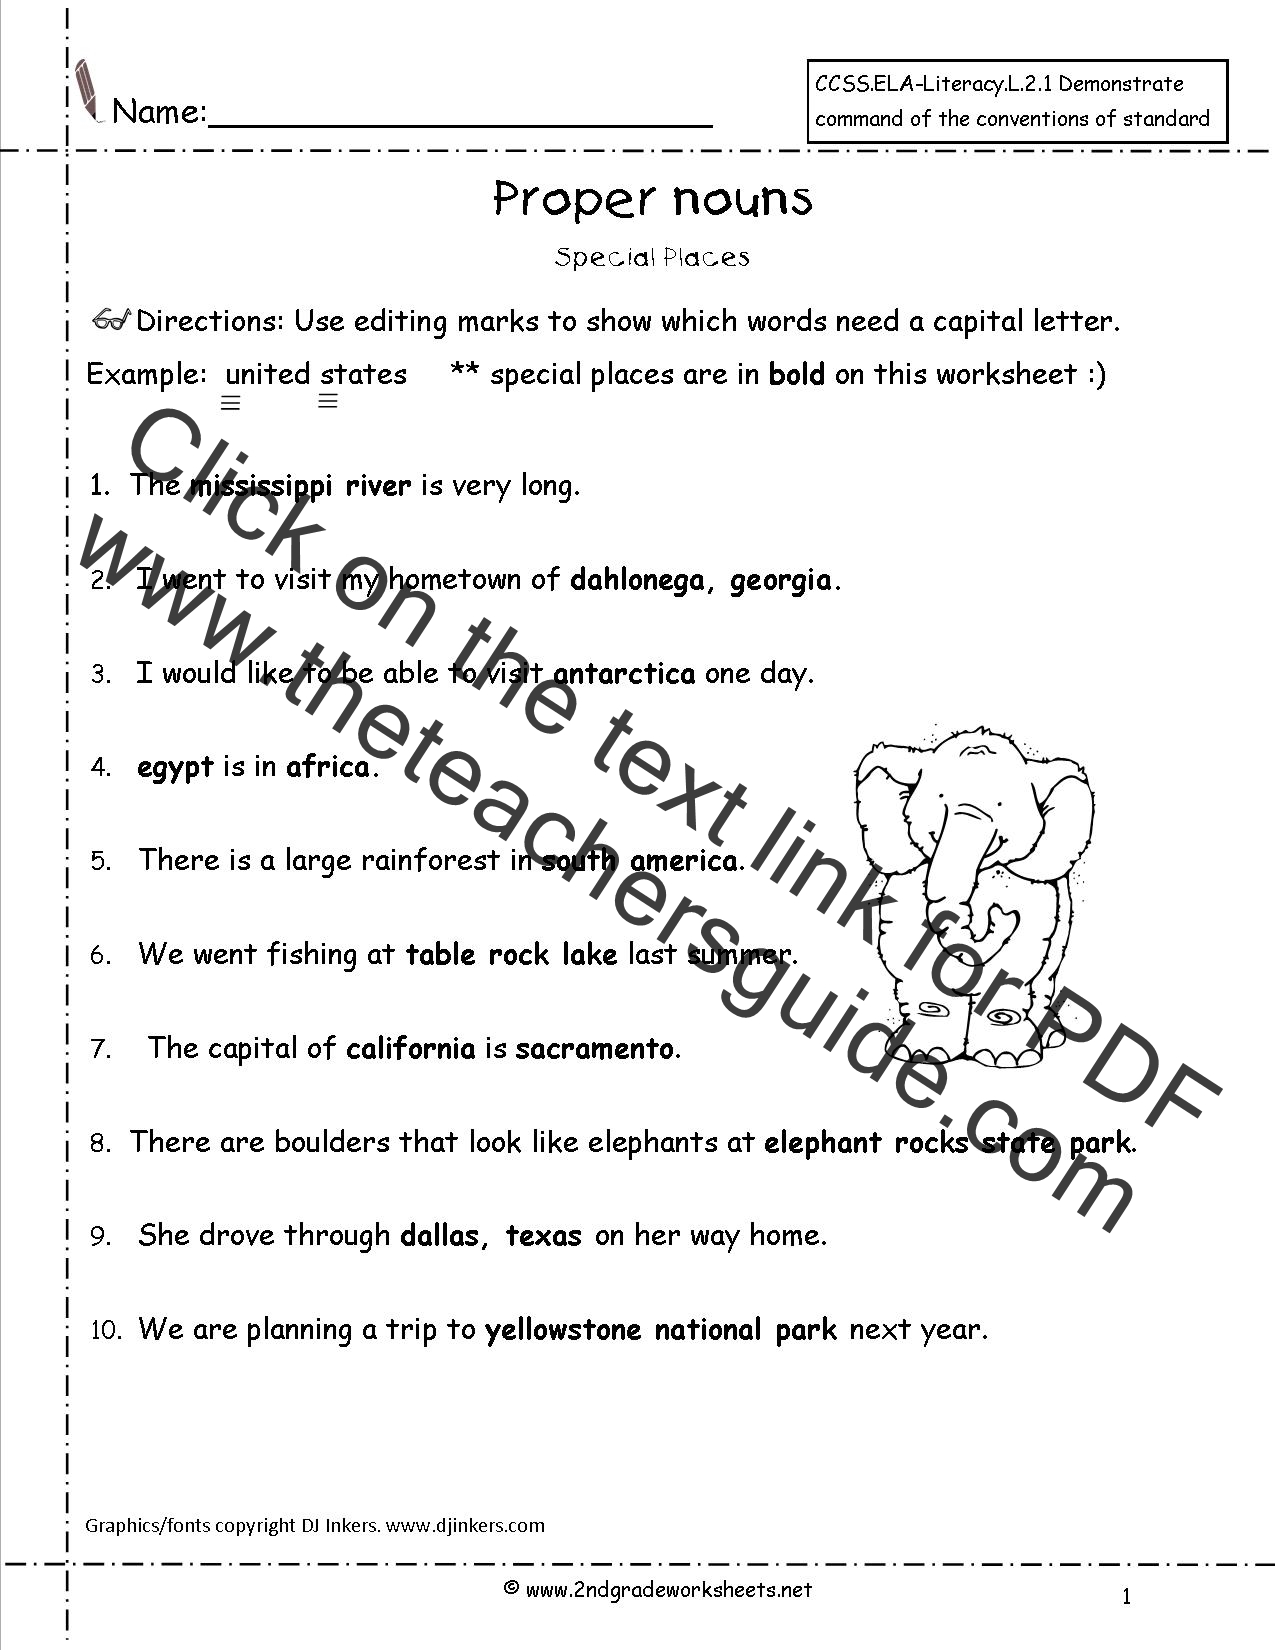 Common and Proper Nouns Worksheets from The Teacher's Guide